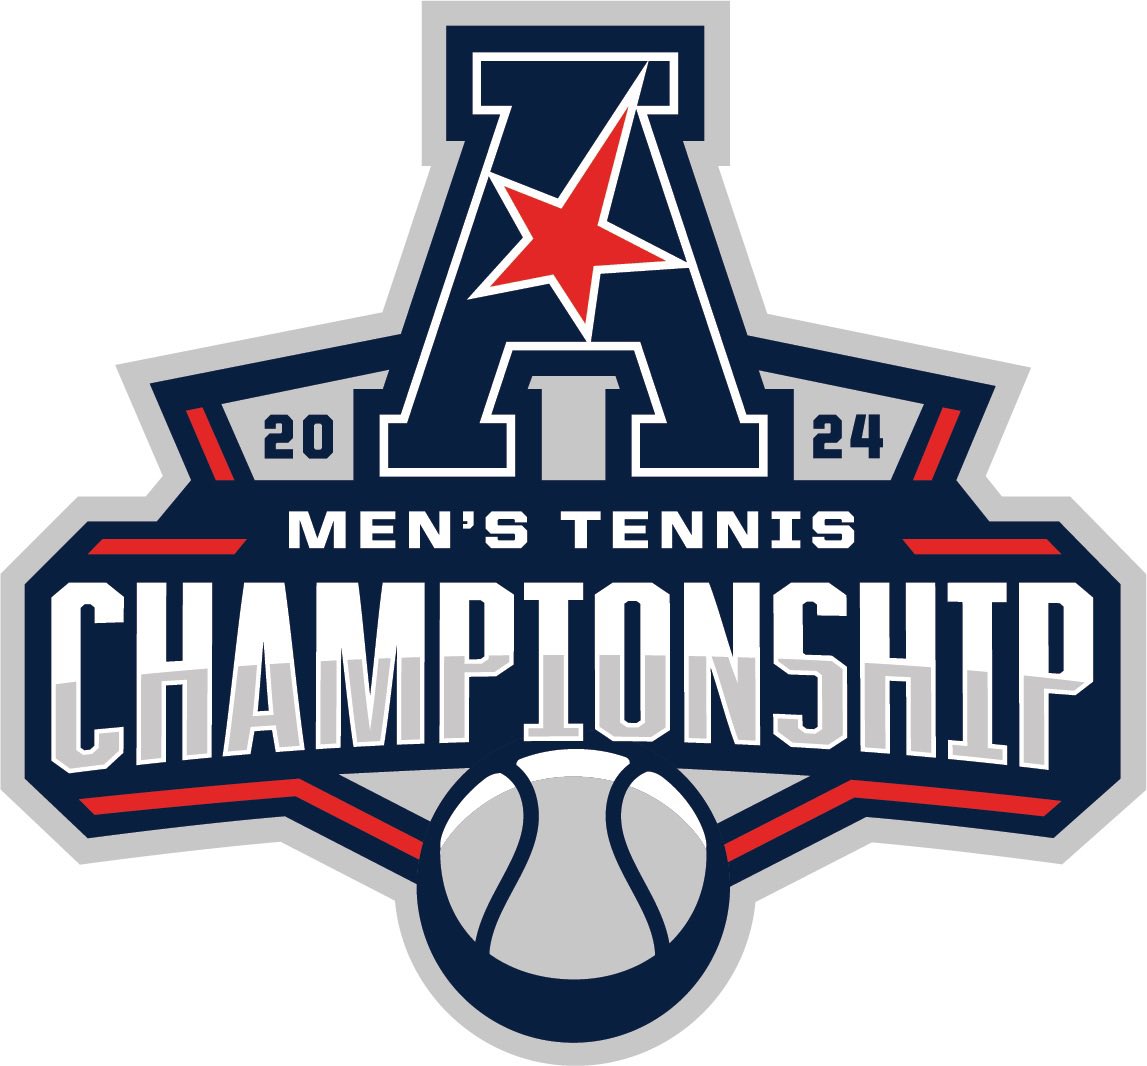 Your Owls have earned a No. 3 seed and will play at 10 am this Friday vs. the winner of Temple and Charlotte. AAC play at the Michael D. Case Tennis Center, on the campus of Tulsa, begins Thursday morning. #LetsGoOwls